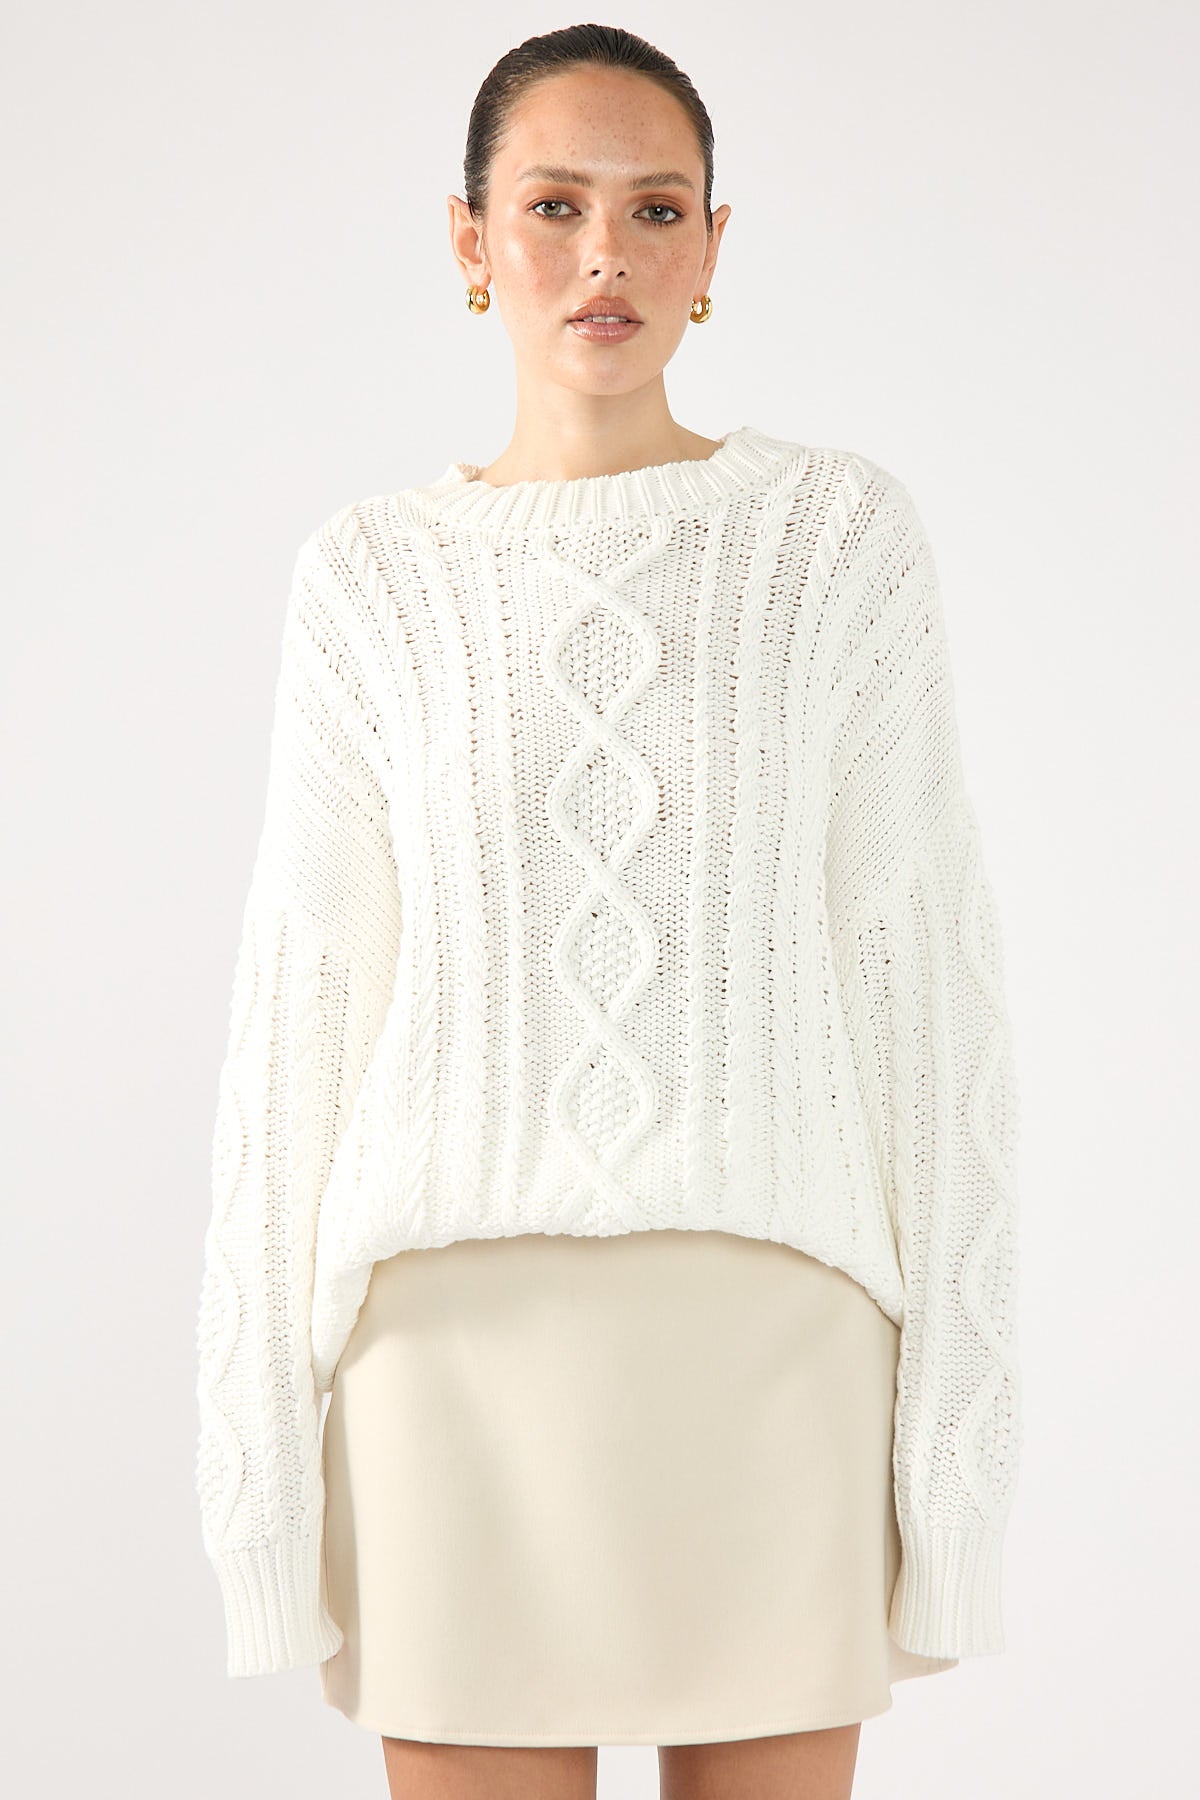 Perfect Stranger Jessna Oversized Cable Knit Cream